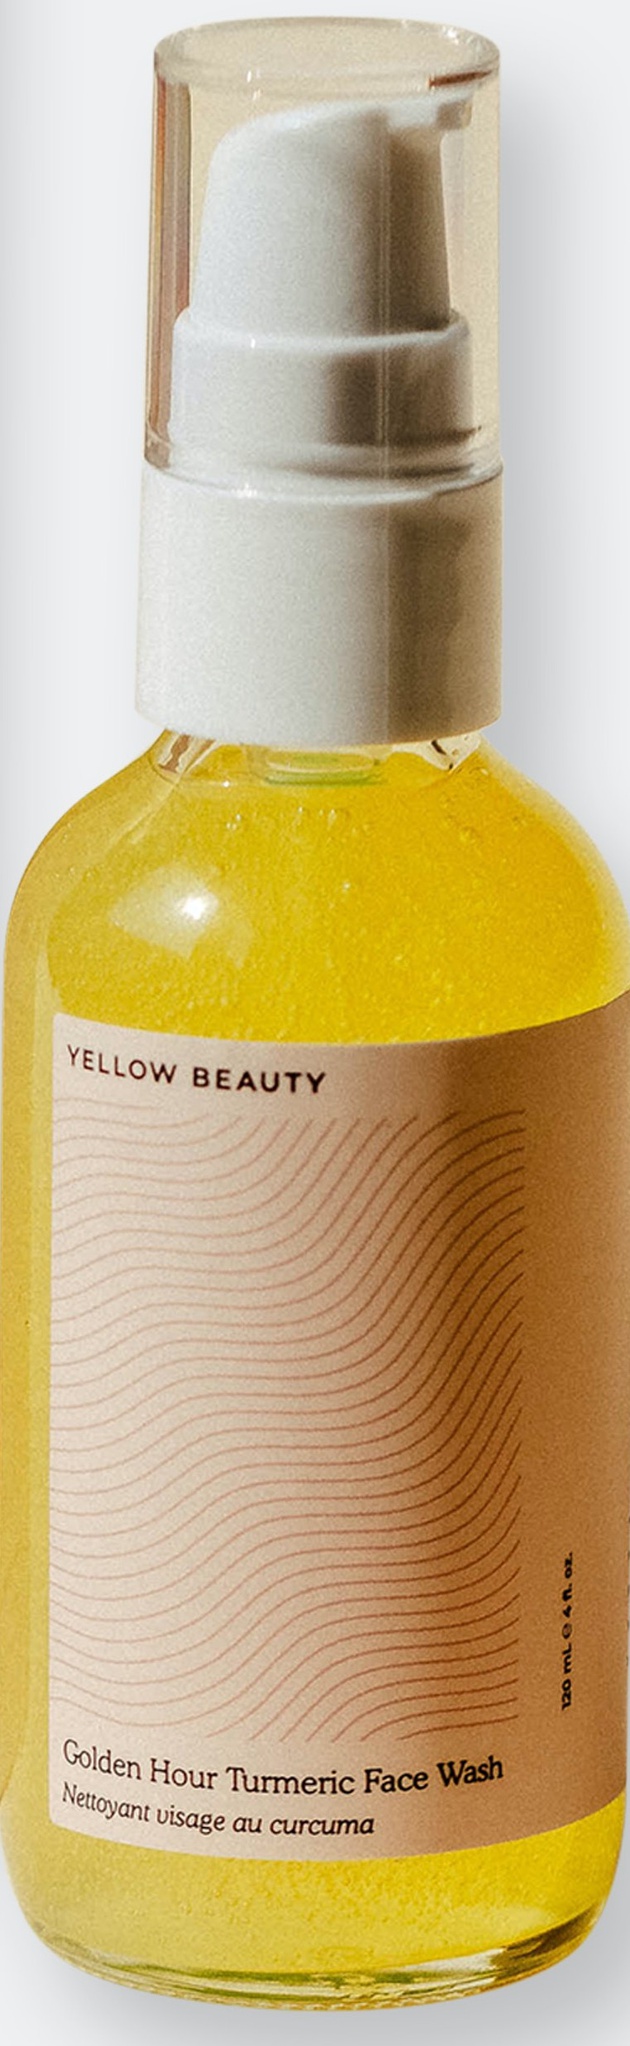 Yellow Beauty Golden Hour Tumeric Face Wash